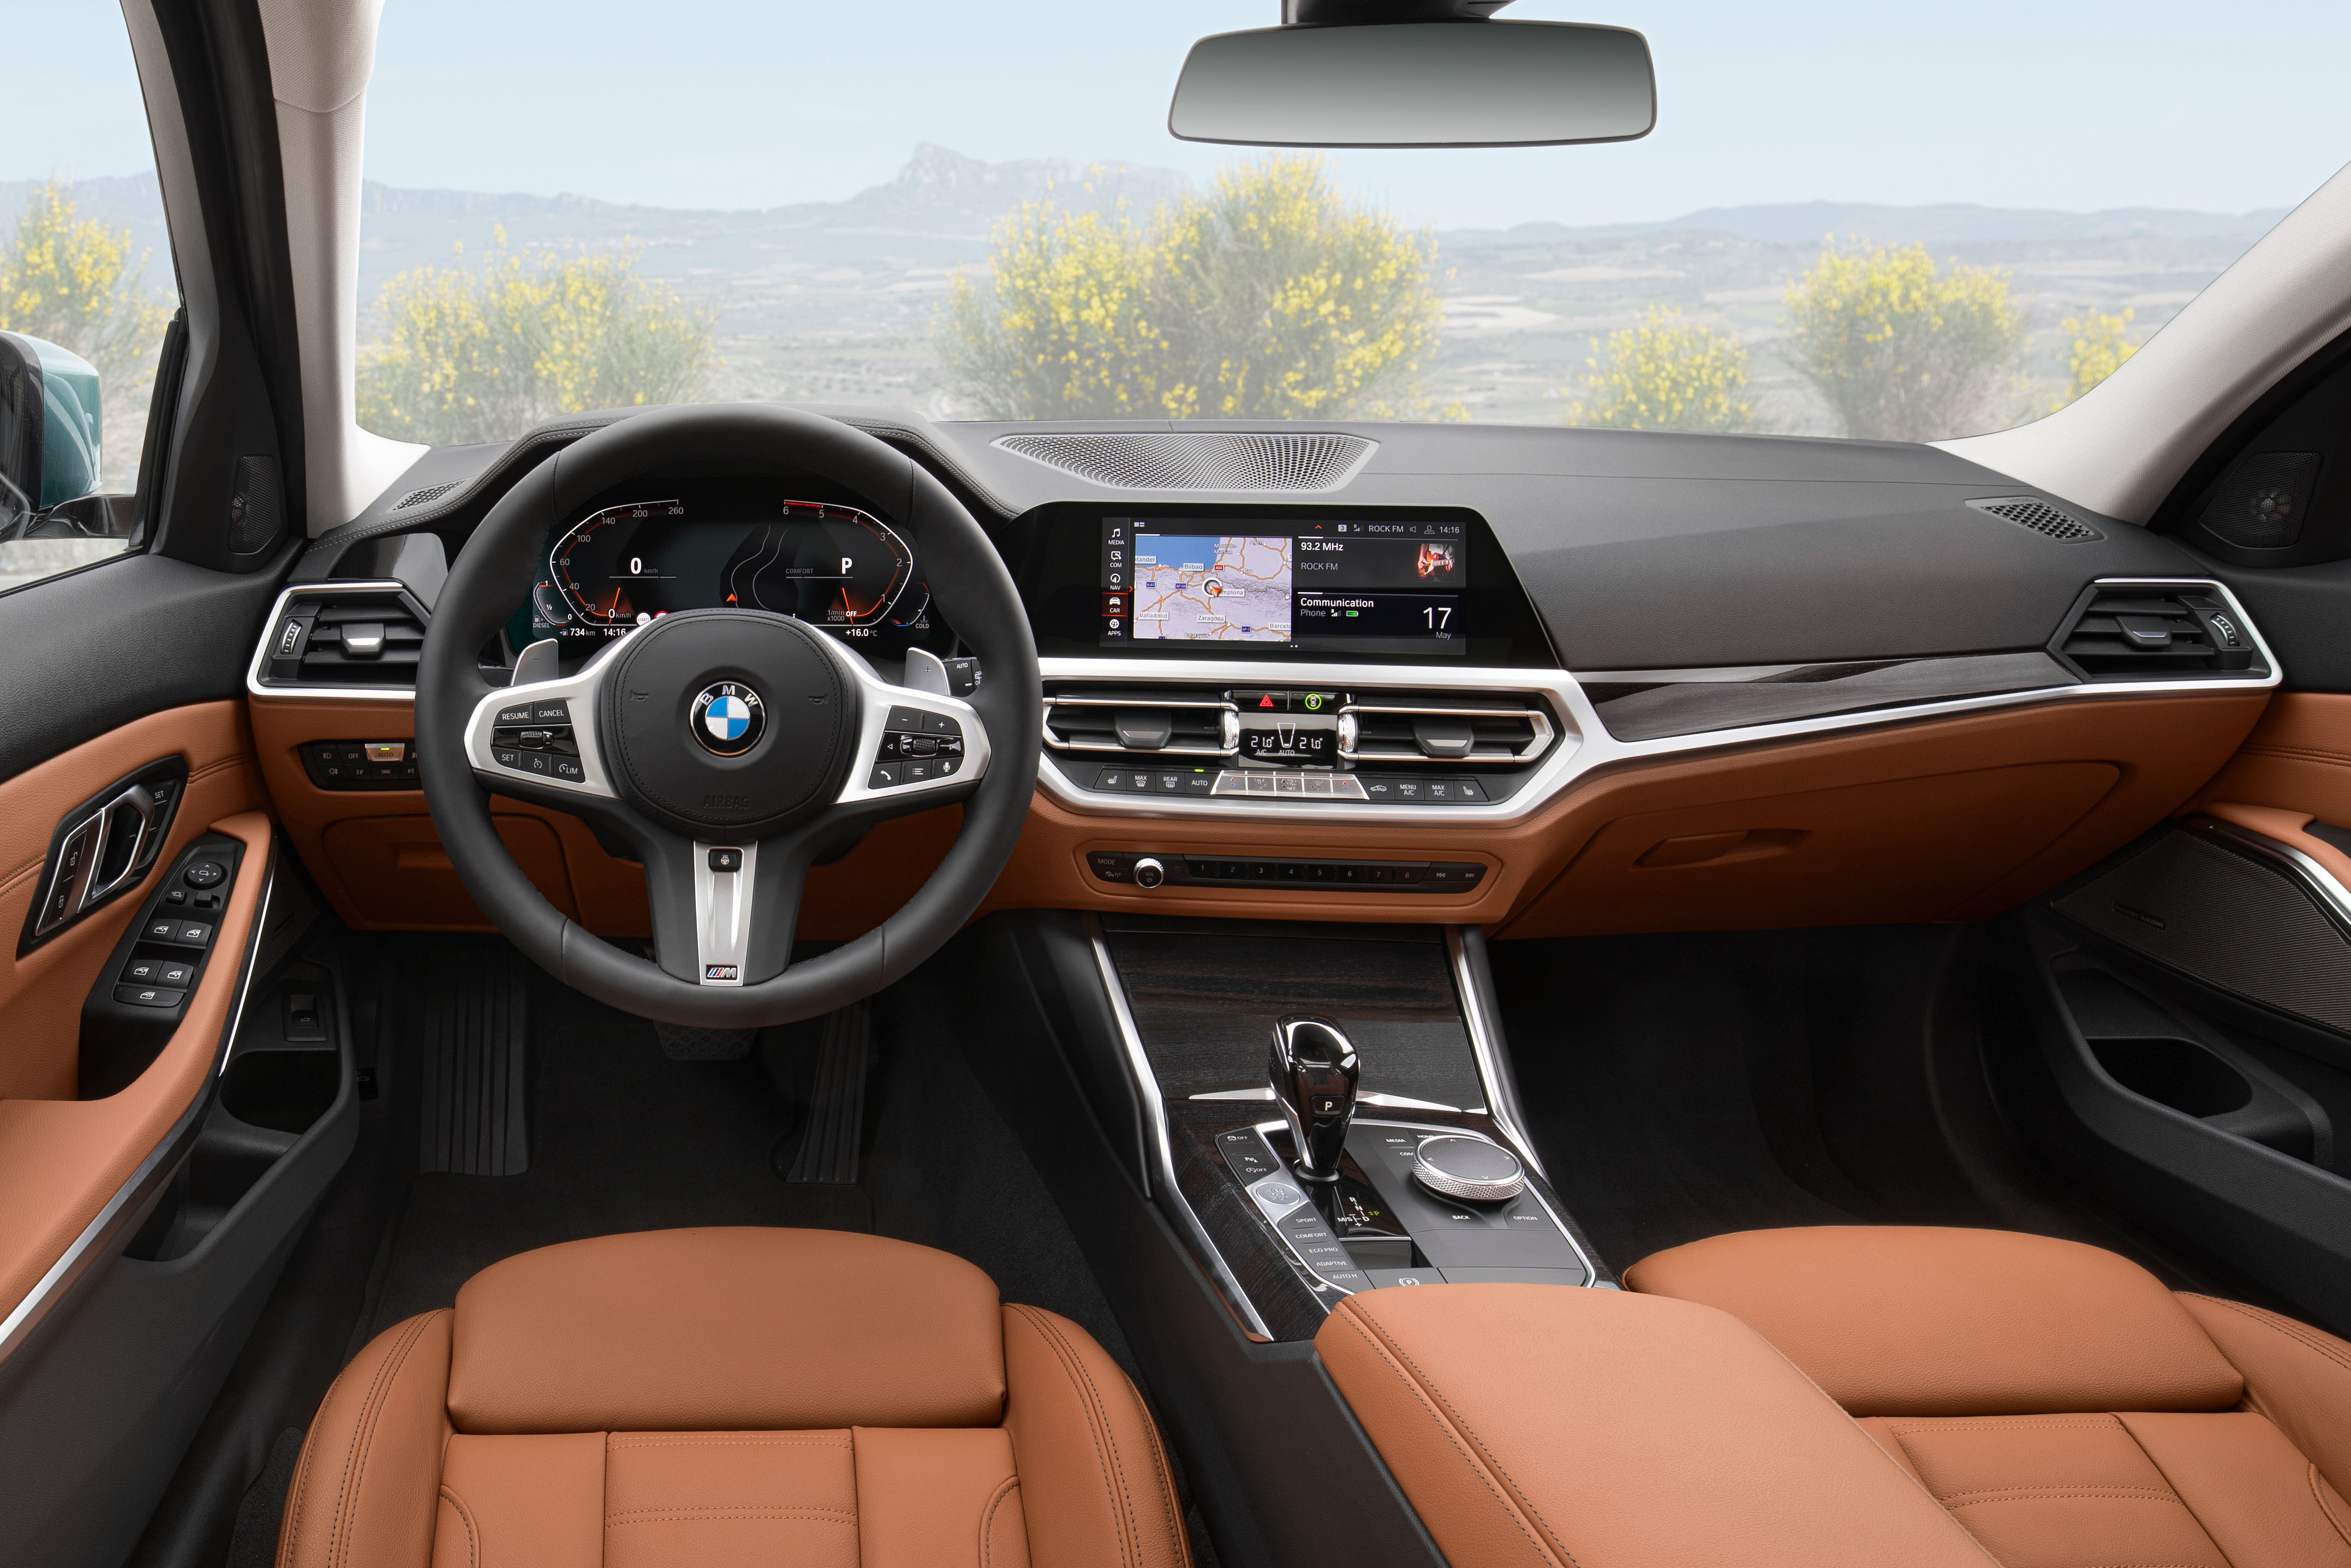 BMW 3 Series containing HYDROCEROL in its dashboard. 
(Photo: BMW group)